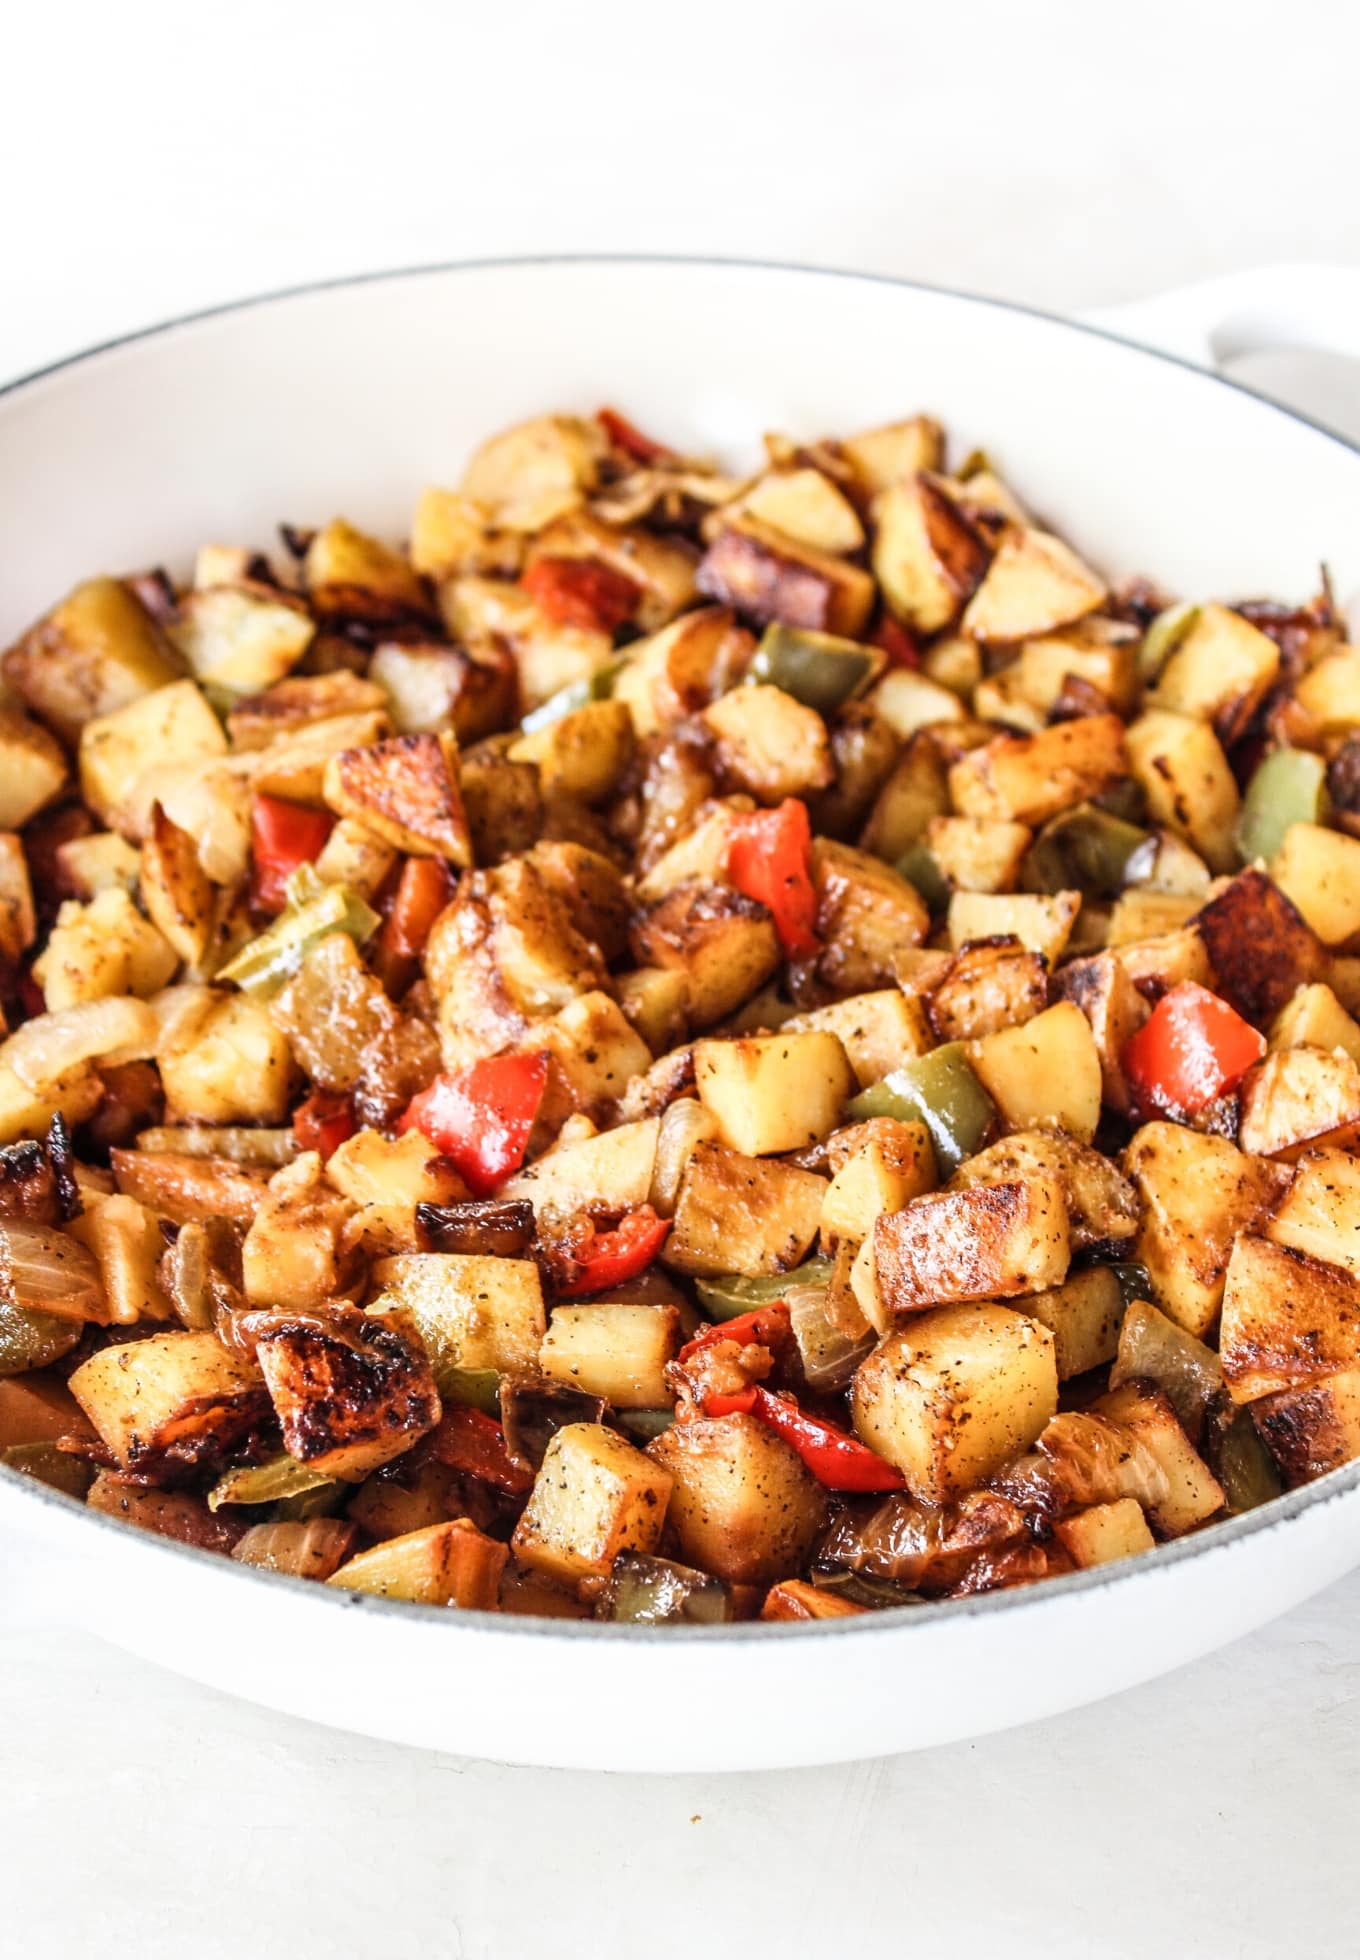 https://thewholecook.com/wp-content/uploads/2020/06/Southwestern-Skillet-Potatoes-by-The-Whole-Cook-vertical.jpg